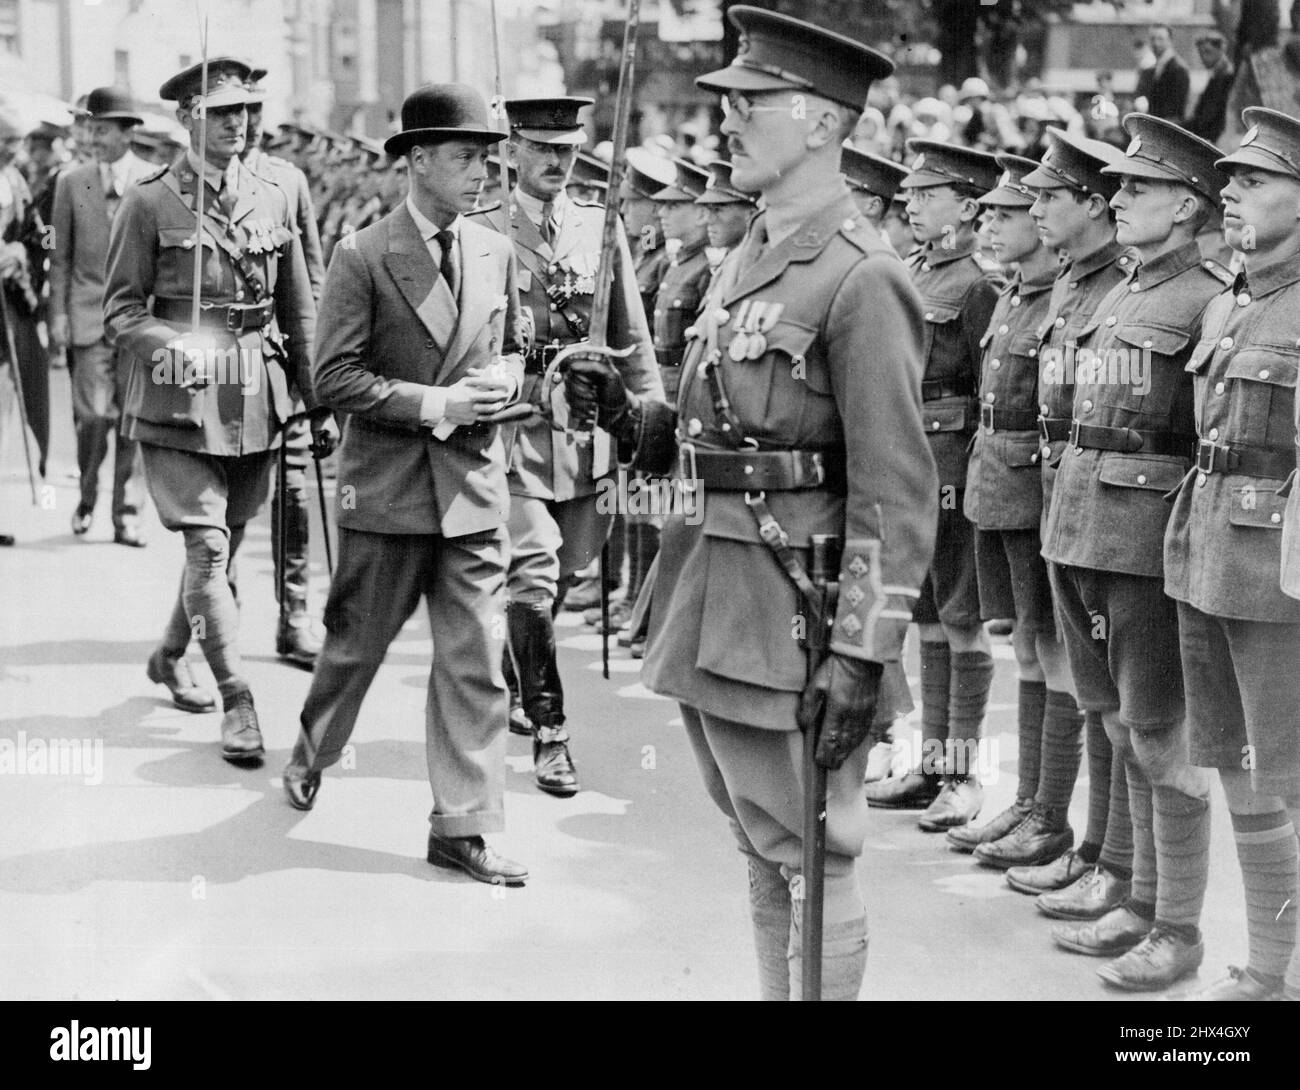 Prince of Wales at Eastbourne. The Prince of Wales flew to Eastbourne this morning on a visit to the town. Photo Shows: The Prince of Wales inspecting the Guard of Honour at Eastbourne Town Hall. June 30, 1931. (Photo by Wide World Photo). Stock Photo